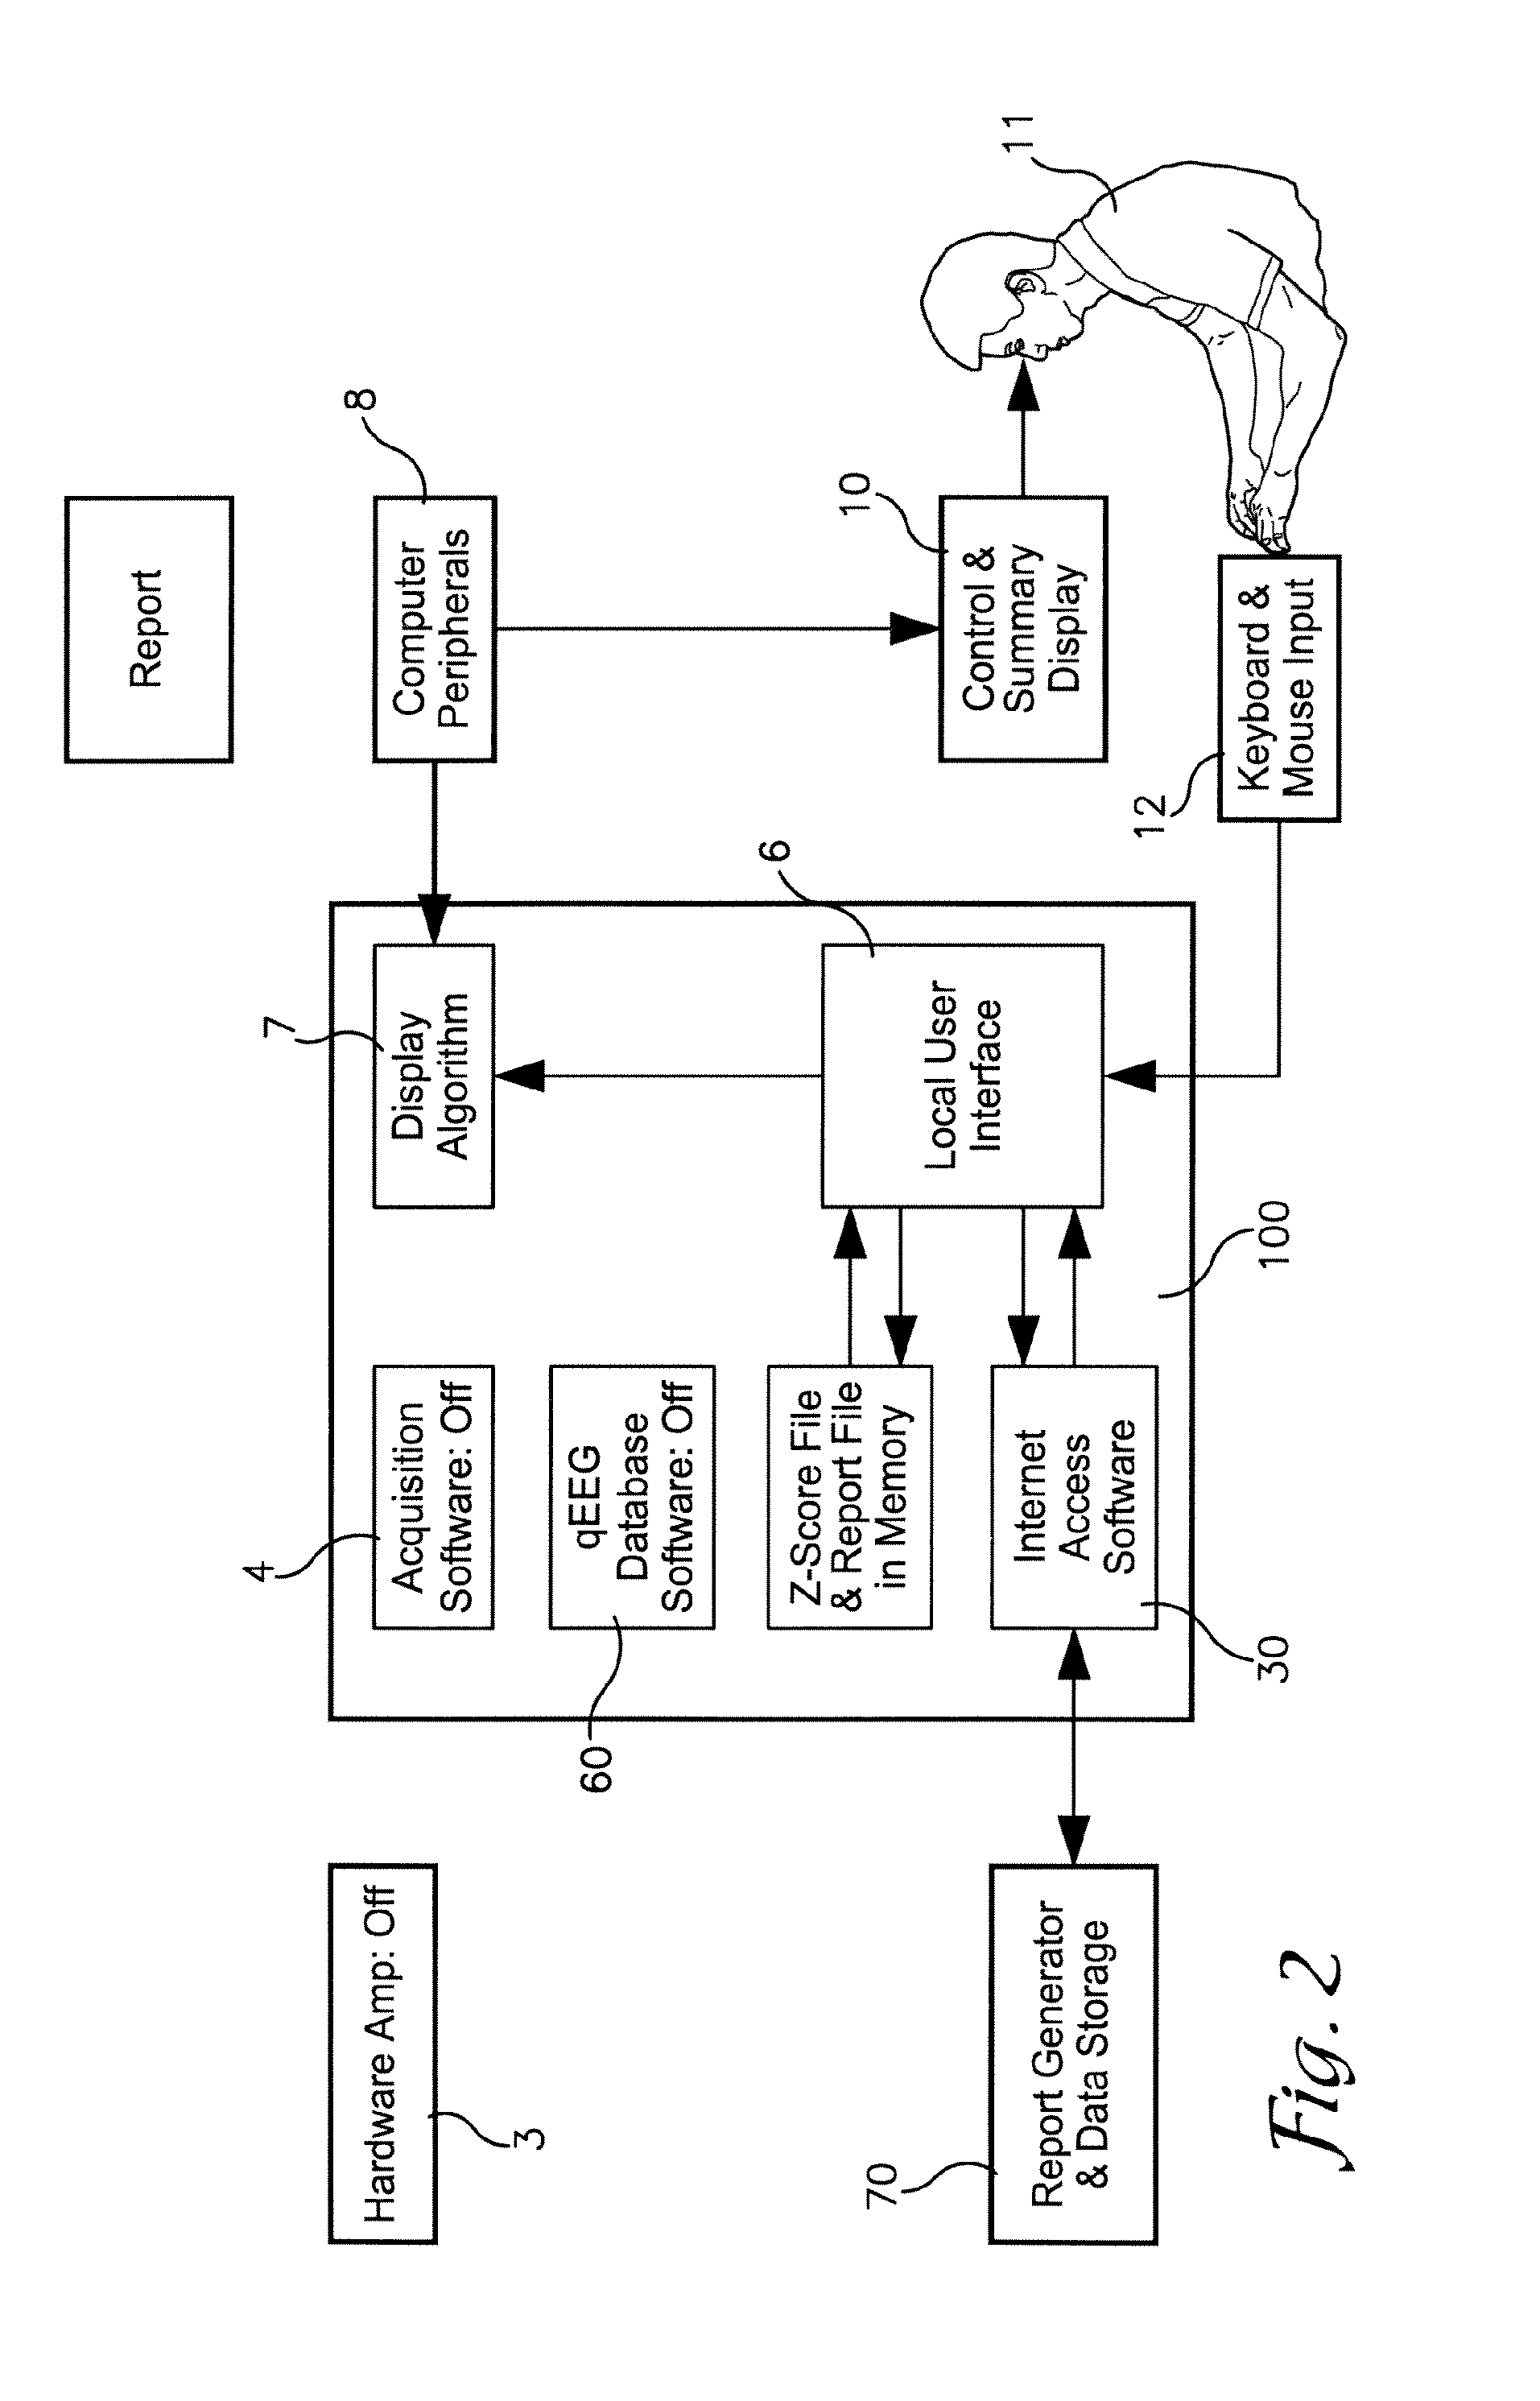 System and method for analyzing electroencephalography data